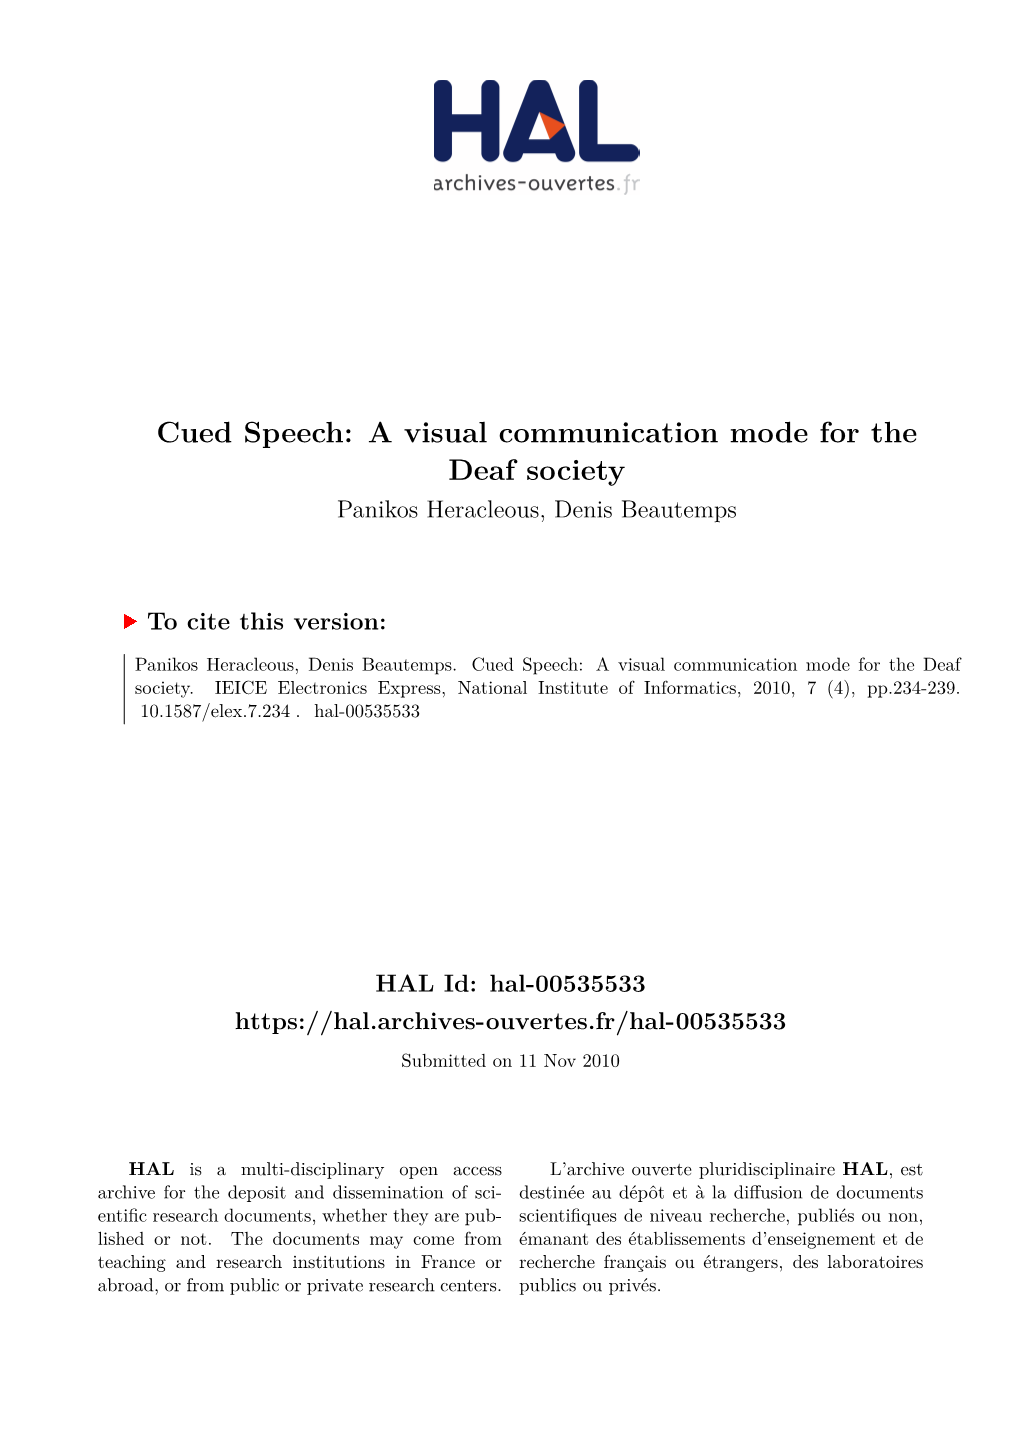 Cued Speech: a Visual Communication Mode for the Deaf Society Panikos Heracleous, Denis Beautemps